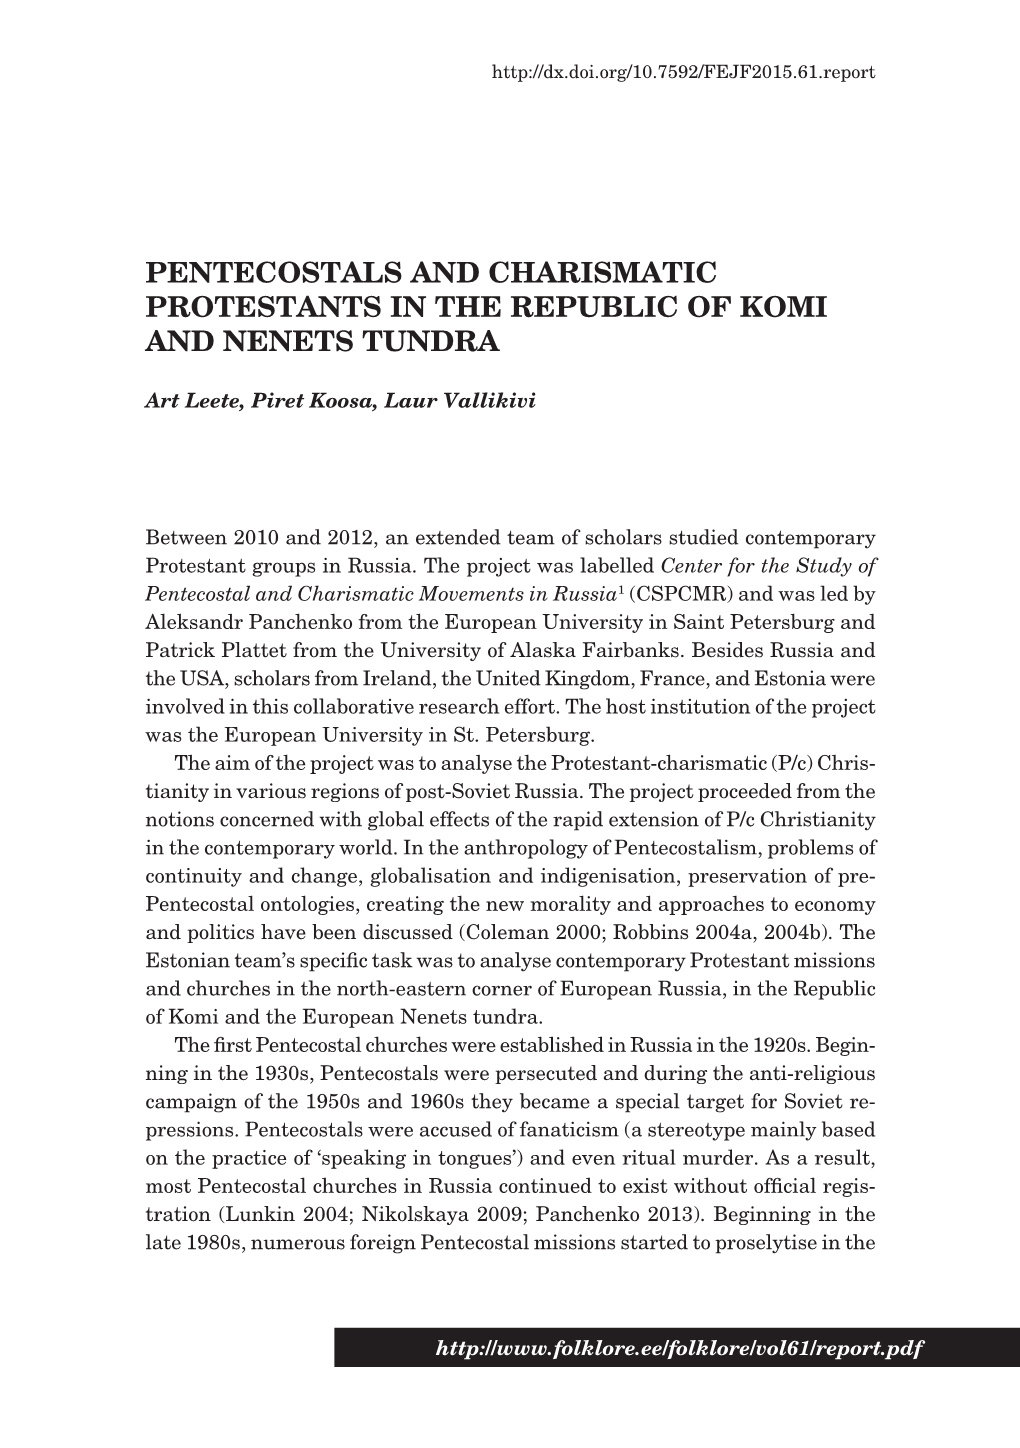 Pentecostals and Charismatic Protestants in the Republic of Komi and Nenets Tundra